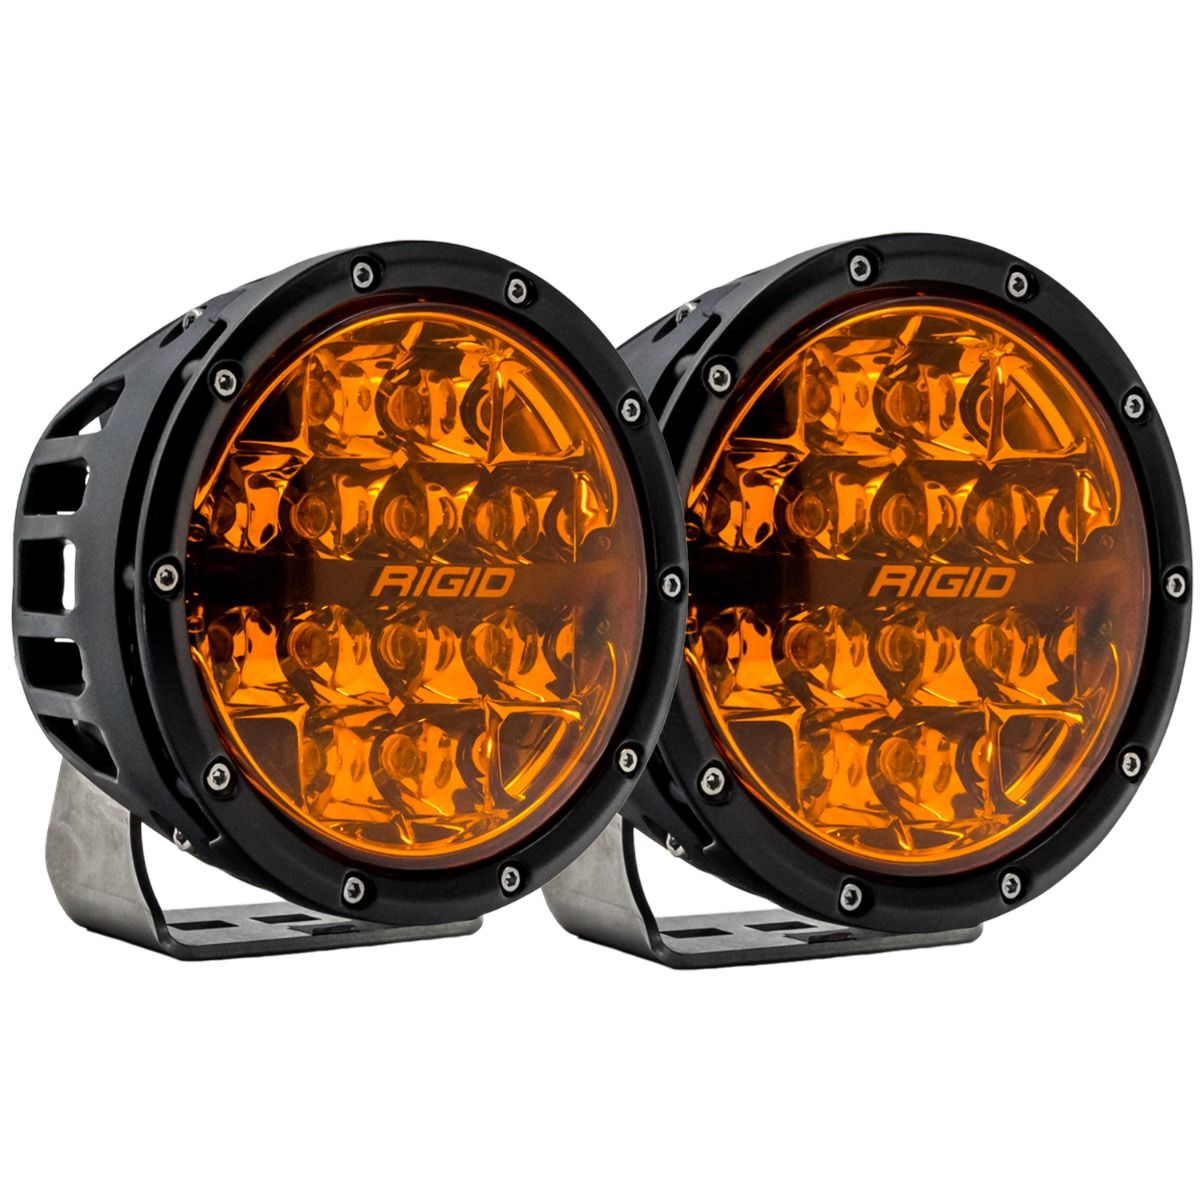 Rigid 36210 360-Series 6 Inch Spot with Amber PRO Lens Pair - BumperStock